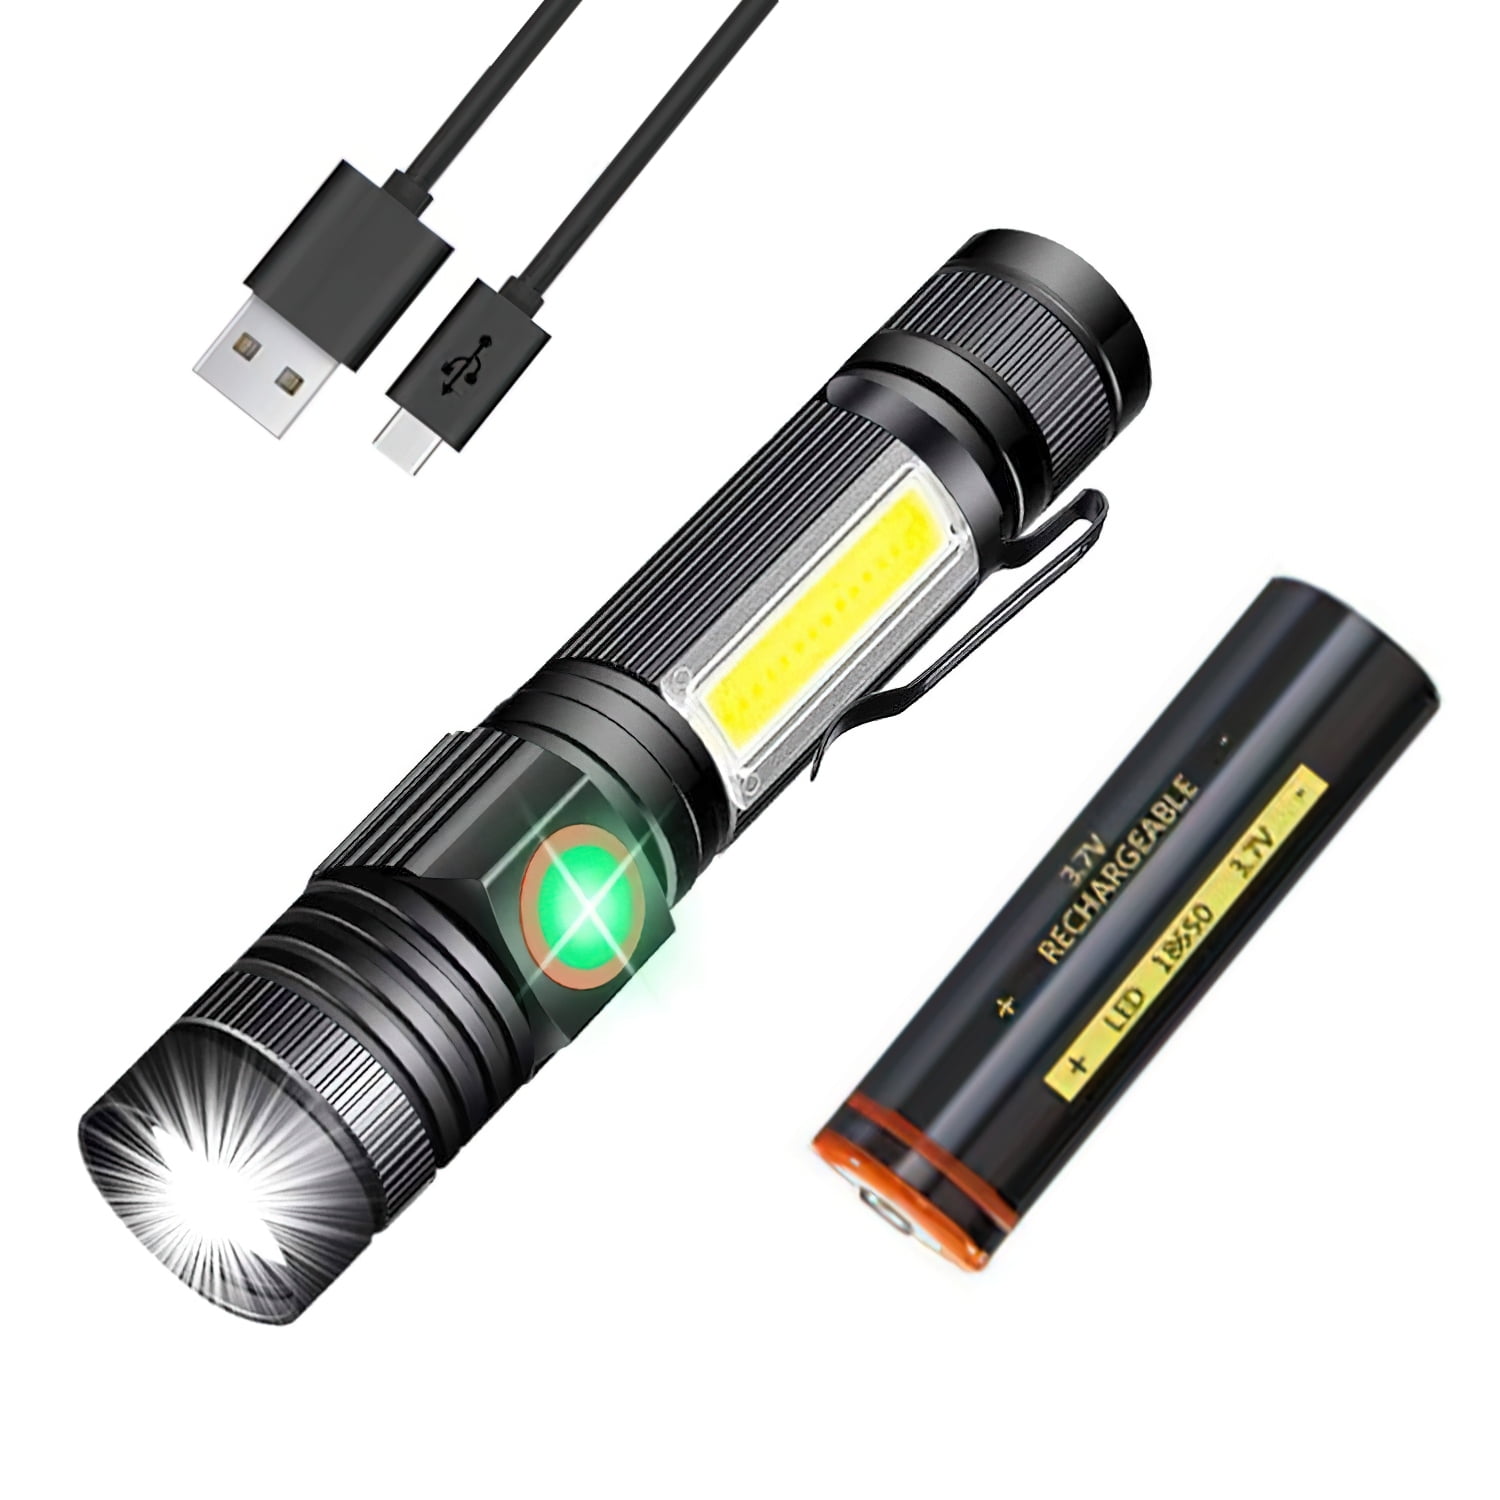 Details about   350000LM Rechargeable Headlight 6 Mode 9LED Headlamp Torch & Battery & USB Cable